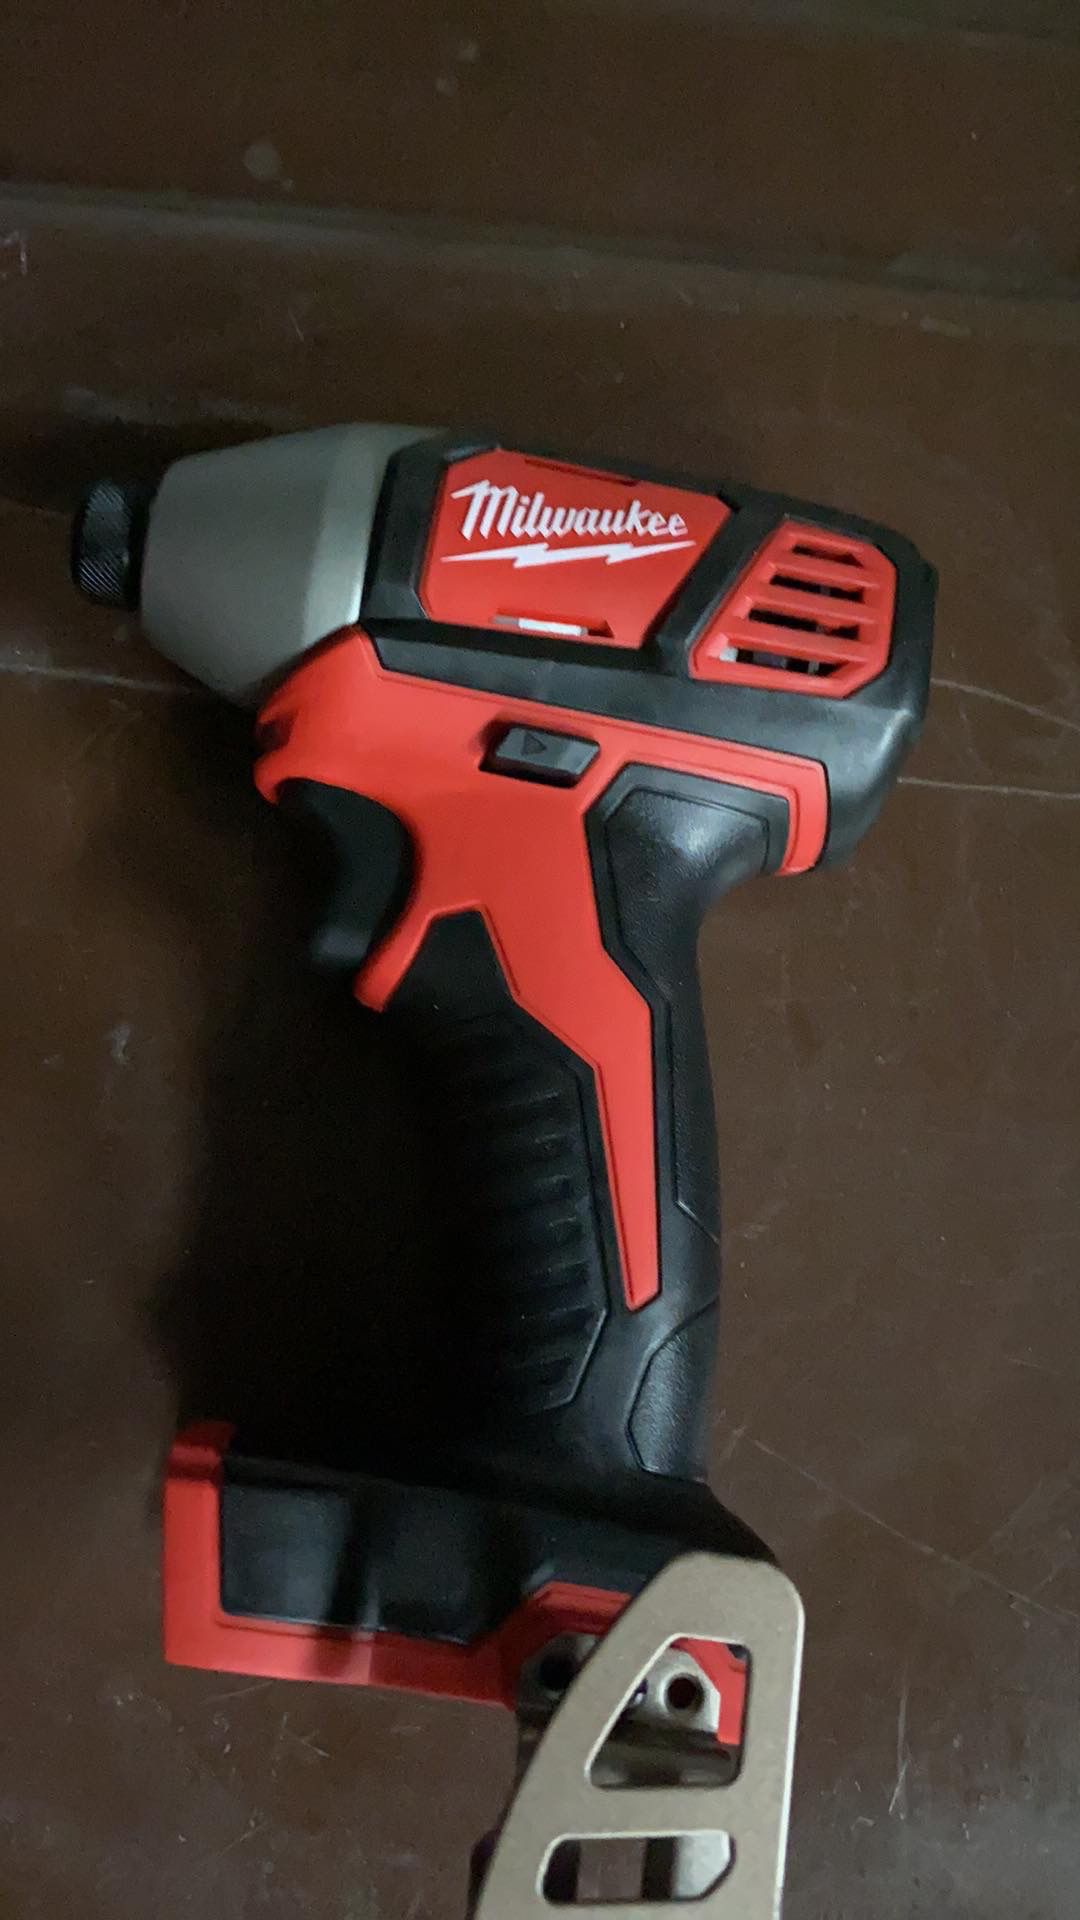 New milwaukee impact drill (tool only)